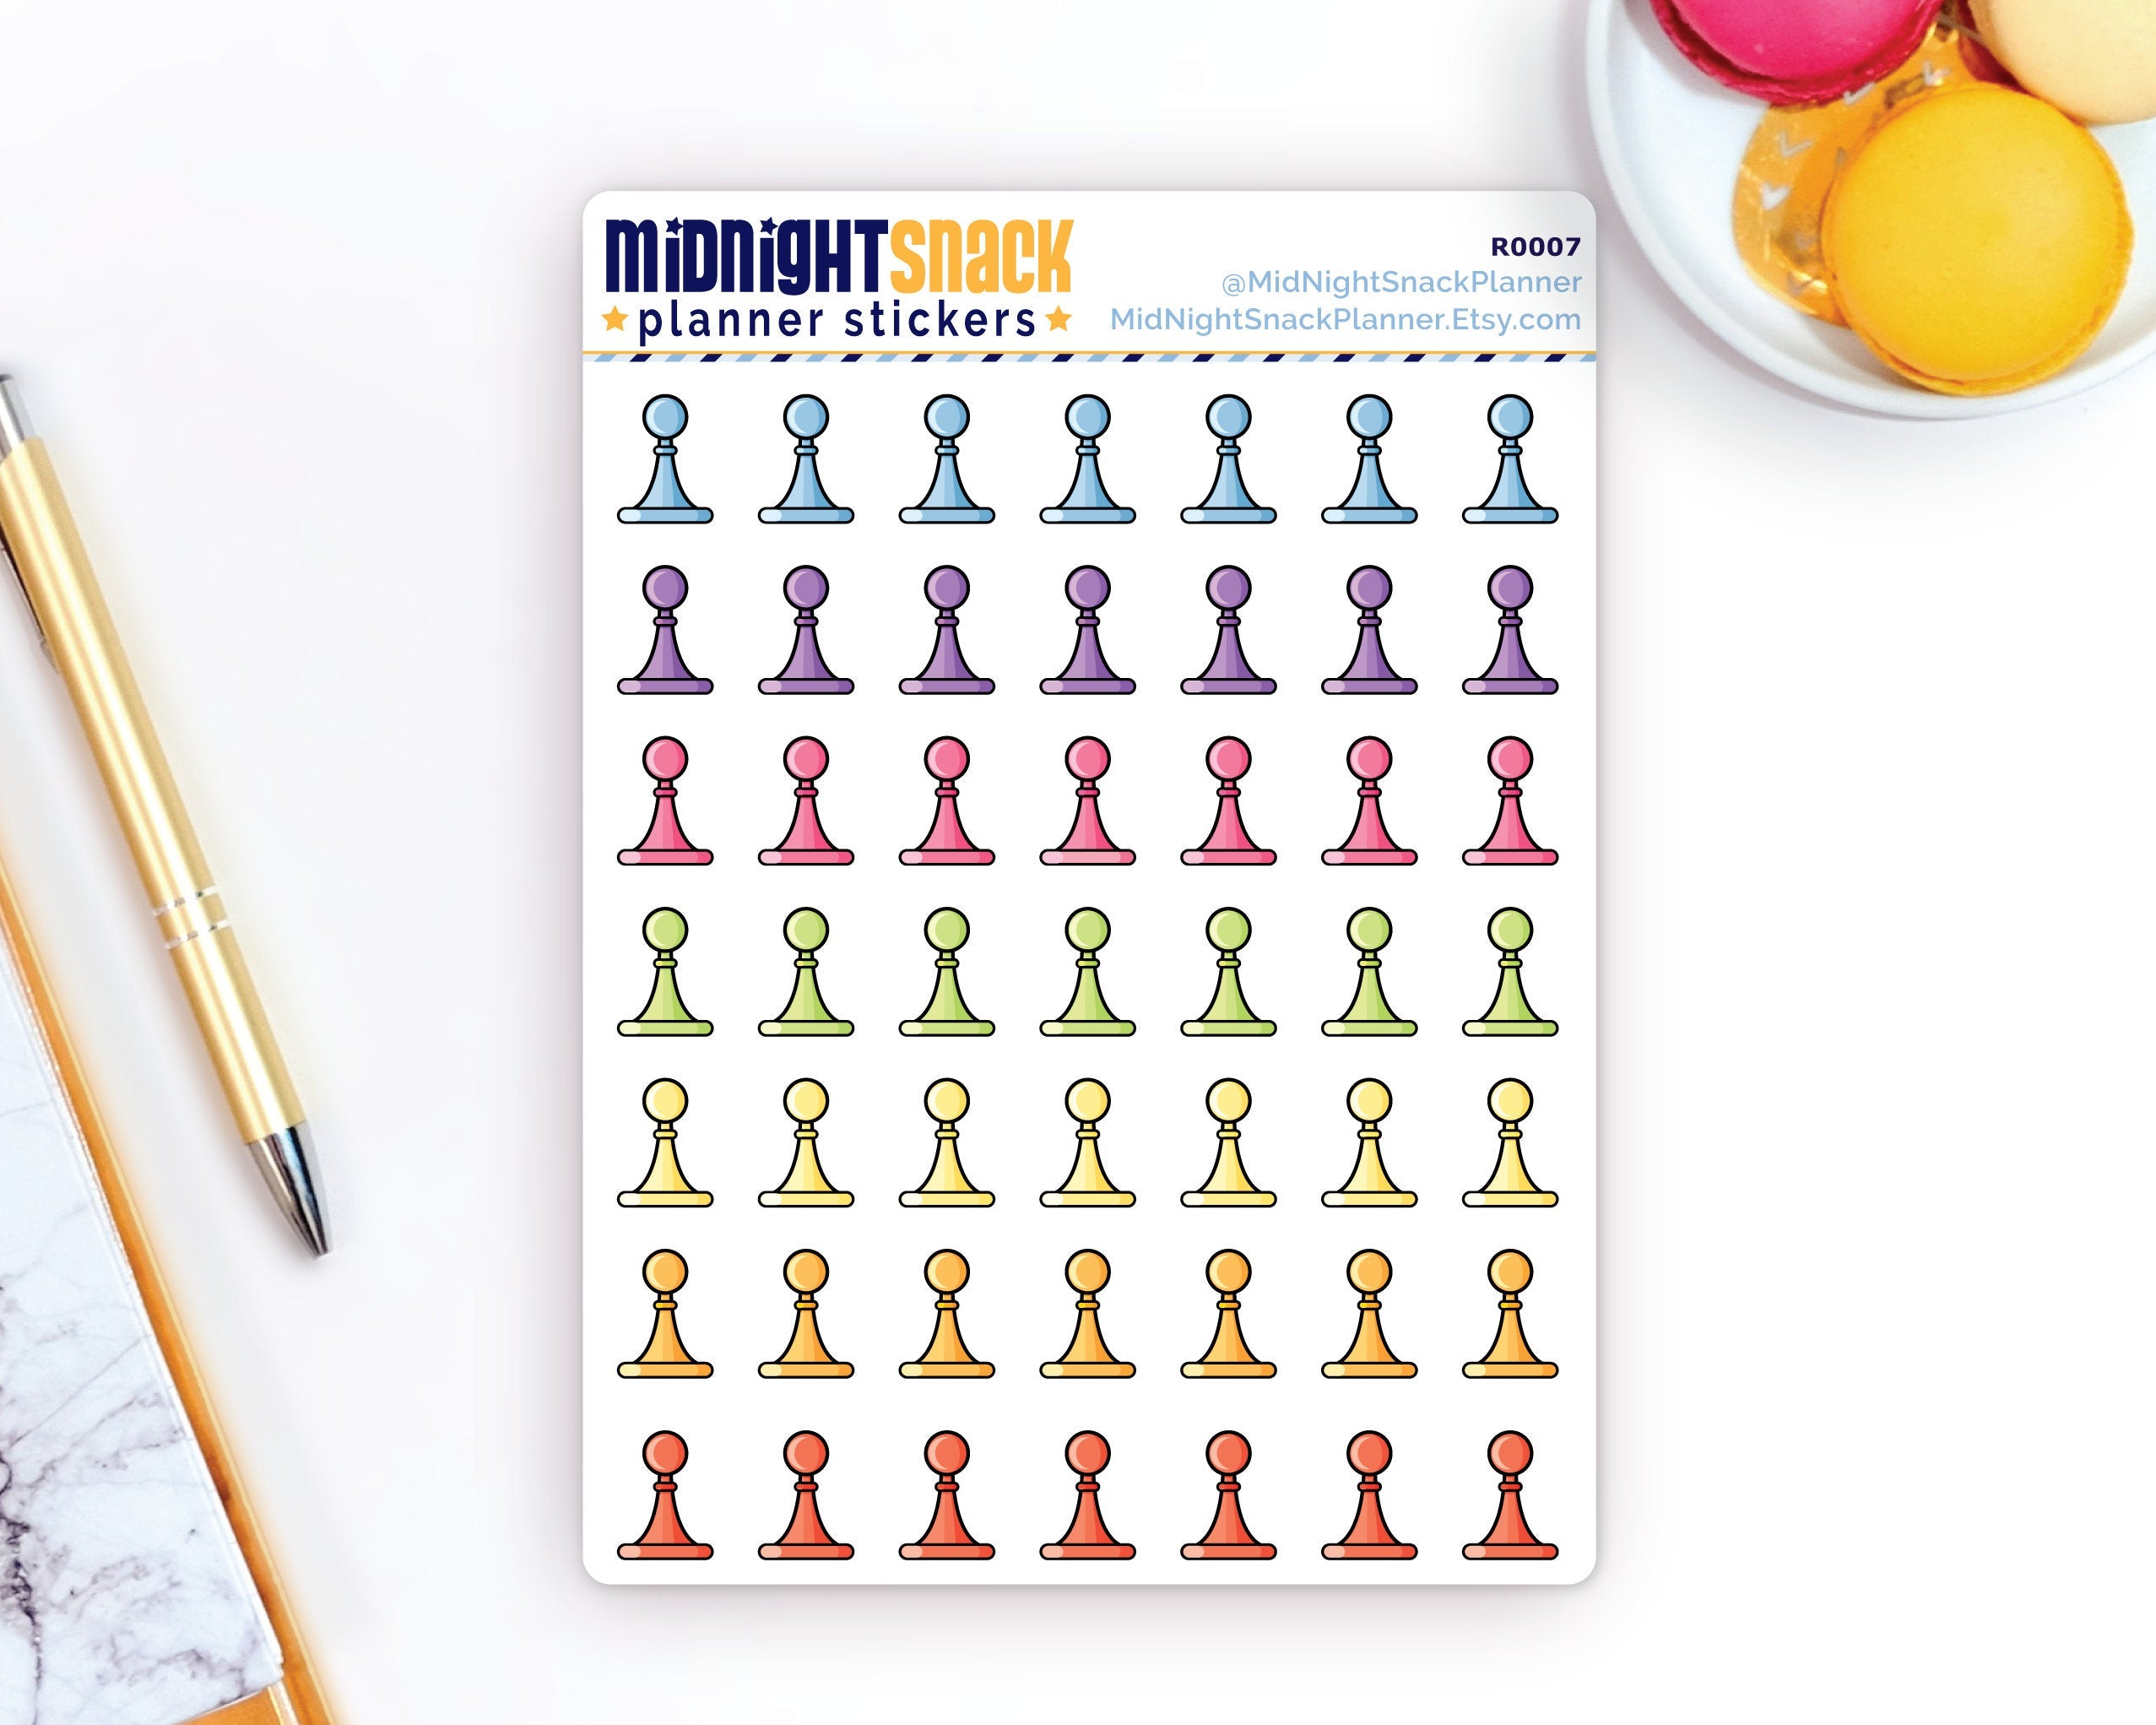 Board Game Icon: Fun and Games Planner Stickers Midnight Snack Planner